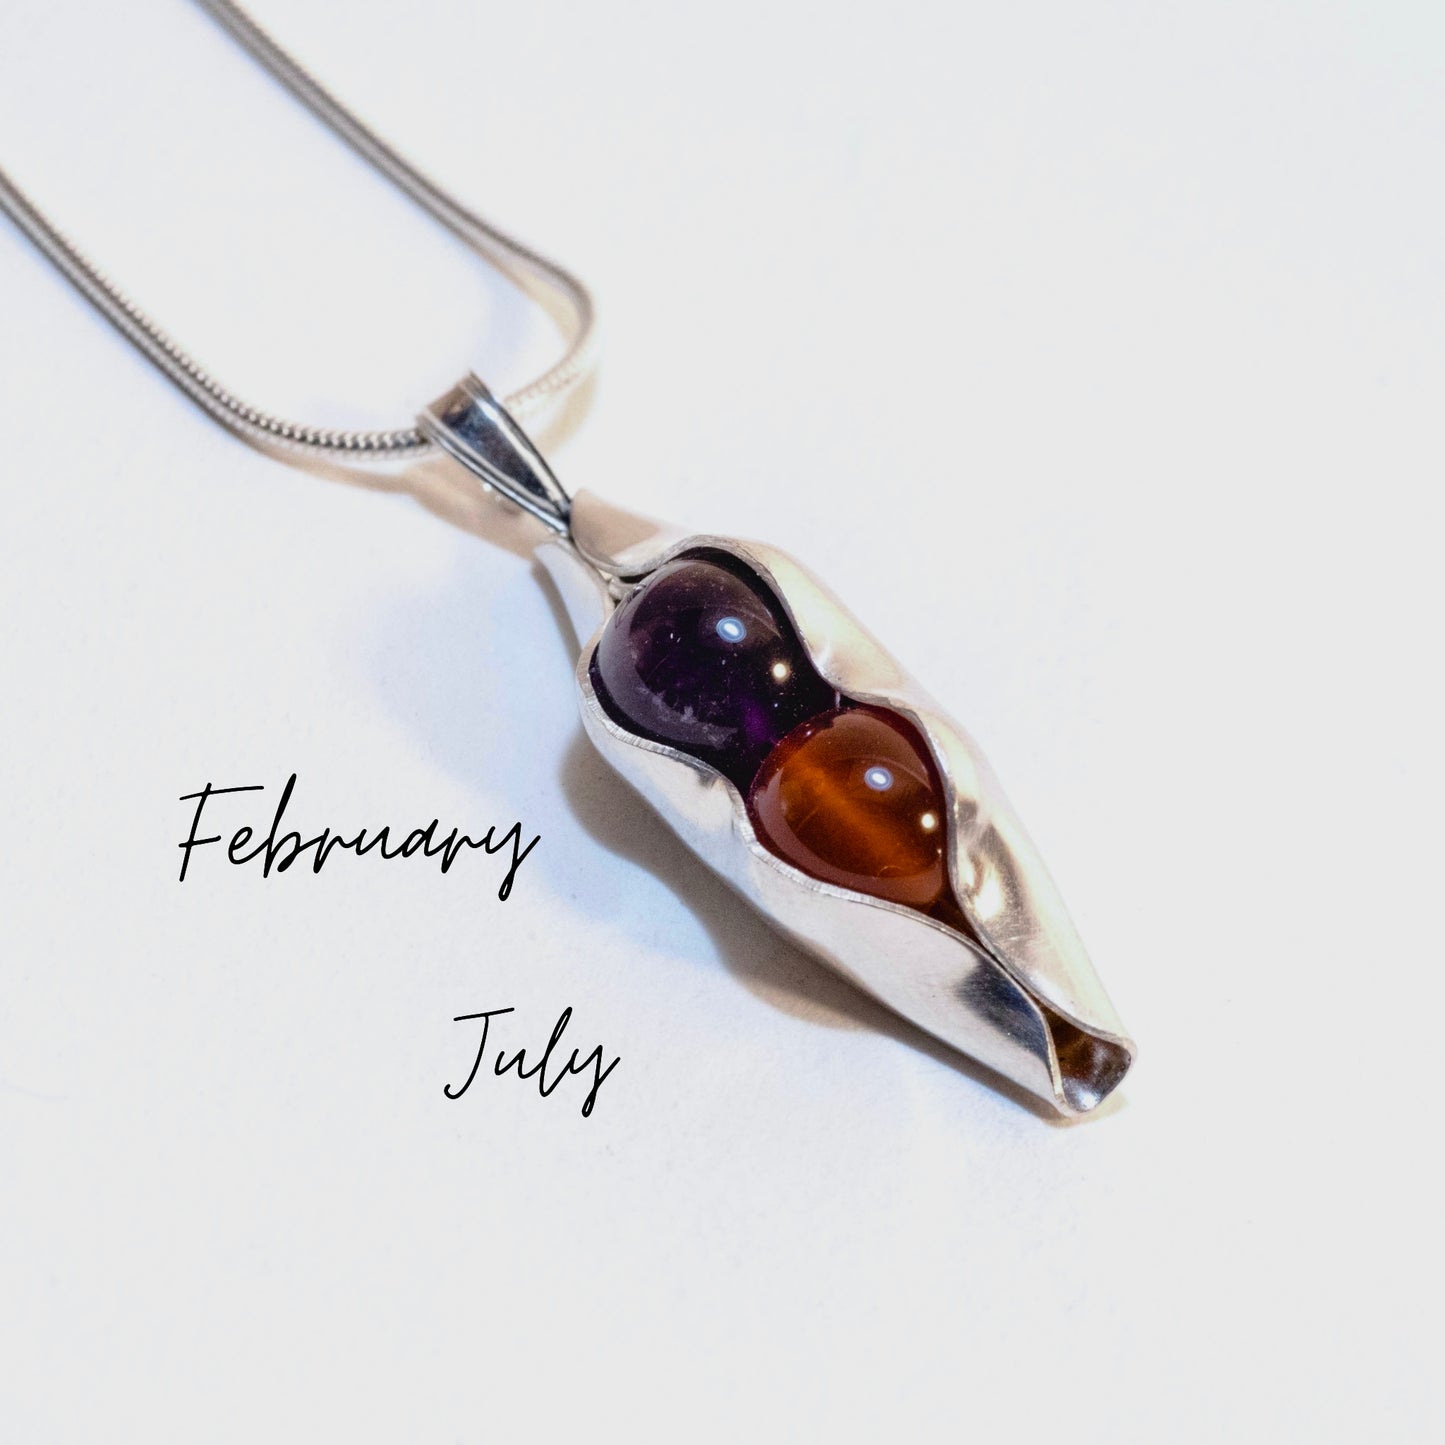 3rd anniversary necklace | Leather anniversary | 3 years of marriage | Sentimental wife gift | Two peas in a pod